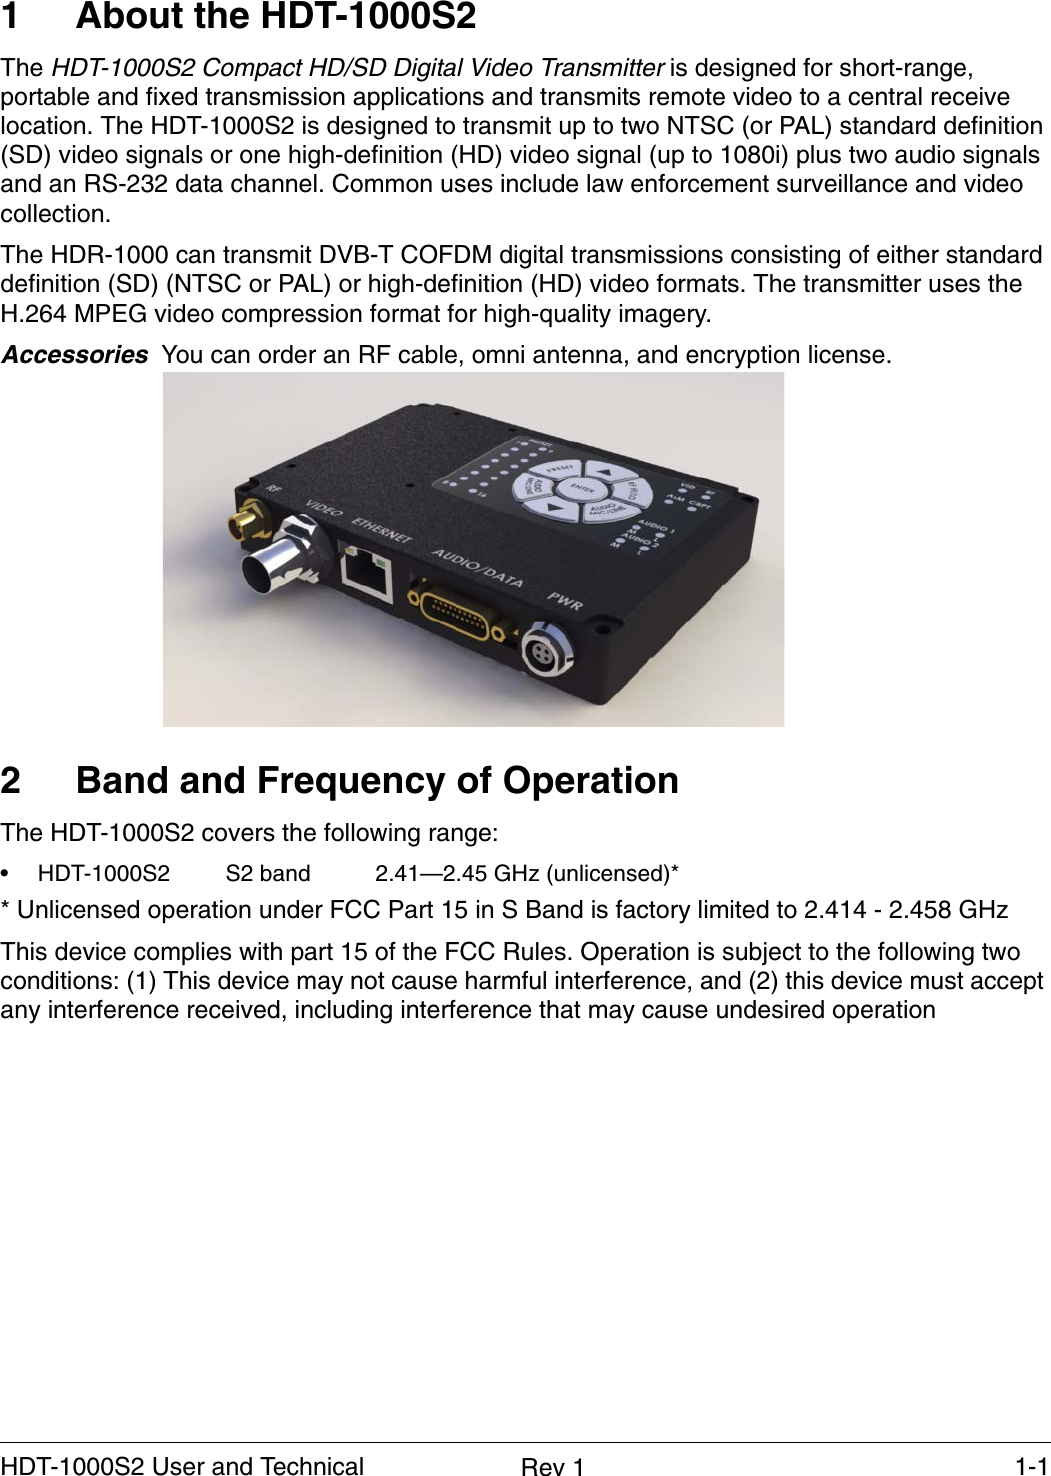    1-1HDT-1000S2 User and Technical  Rev 11 About the HDT-1000S2The HDT-1000S2 Compact HD/SD Digital Video Transmitter is designed for short-range, portable and fixed transmission applications and transmits remote video to a central receive location. The HDT-1000S2 is designed to transmit up to two NTSC (or PAL) standard definition (SD) video signals or one high-definition (HD) video signal (up to 1080i) plus two audio signals and an RS-232 data channel. Common uses include law enforcement surveillance and video collection.The HDR-1000 can transmit DVB-T COFDM digital transmissions consisting of either standard definition (SD) (NTSC or PAL) or high-definition (HD) video formats. The transmitter uses the H.264 MPEG video compression format for high-quality imagery.Accessories  You can order an RF cable, omni antenna, and encryption license.2 Band and Frequency of OperationThe HDT-1000S2 covers the following range:• HDT-1000S2  S2 band 2.41—2.45 GHz (unlicensed)* * Unlicensed operation under FCC Part 15 in S Band is factory limited to 2.414 - 2.458 GHzThis device complies with part 15 of the FCC Rules. Operation is subject to the following two conditions: (1) This device may not cause harmful interference, and (2) this device must accept any interference received, including interference that may cause undesired operation 